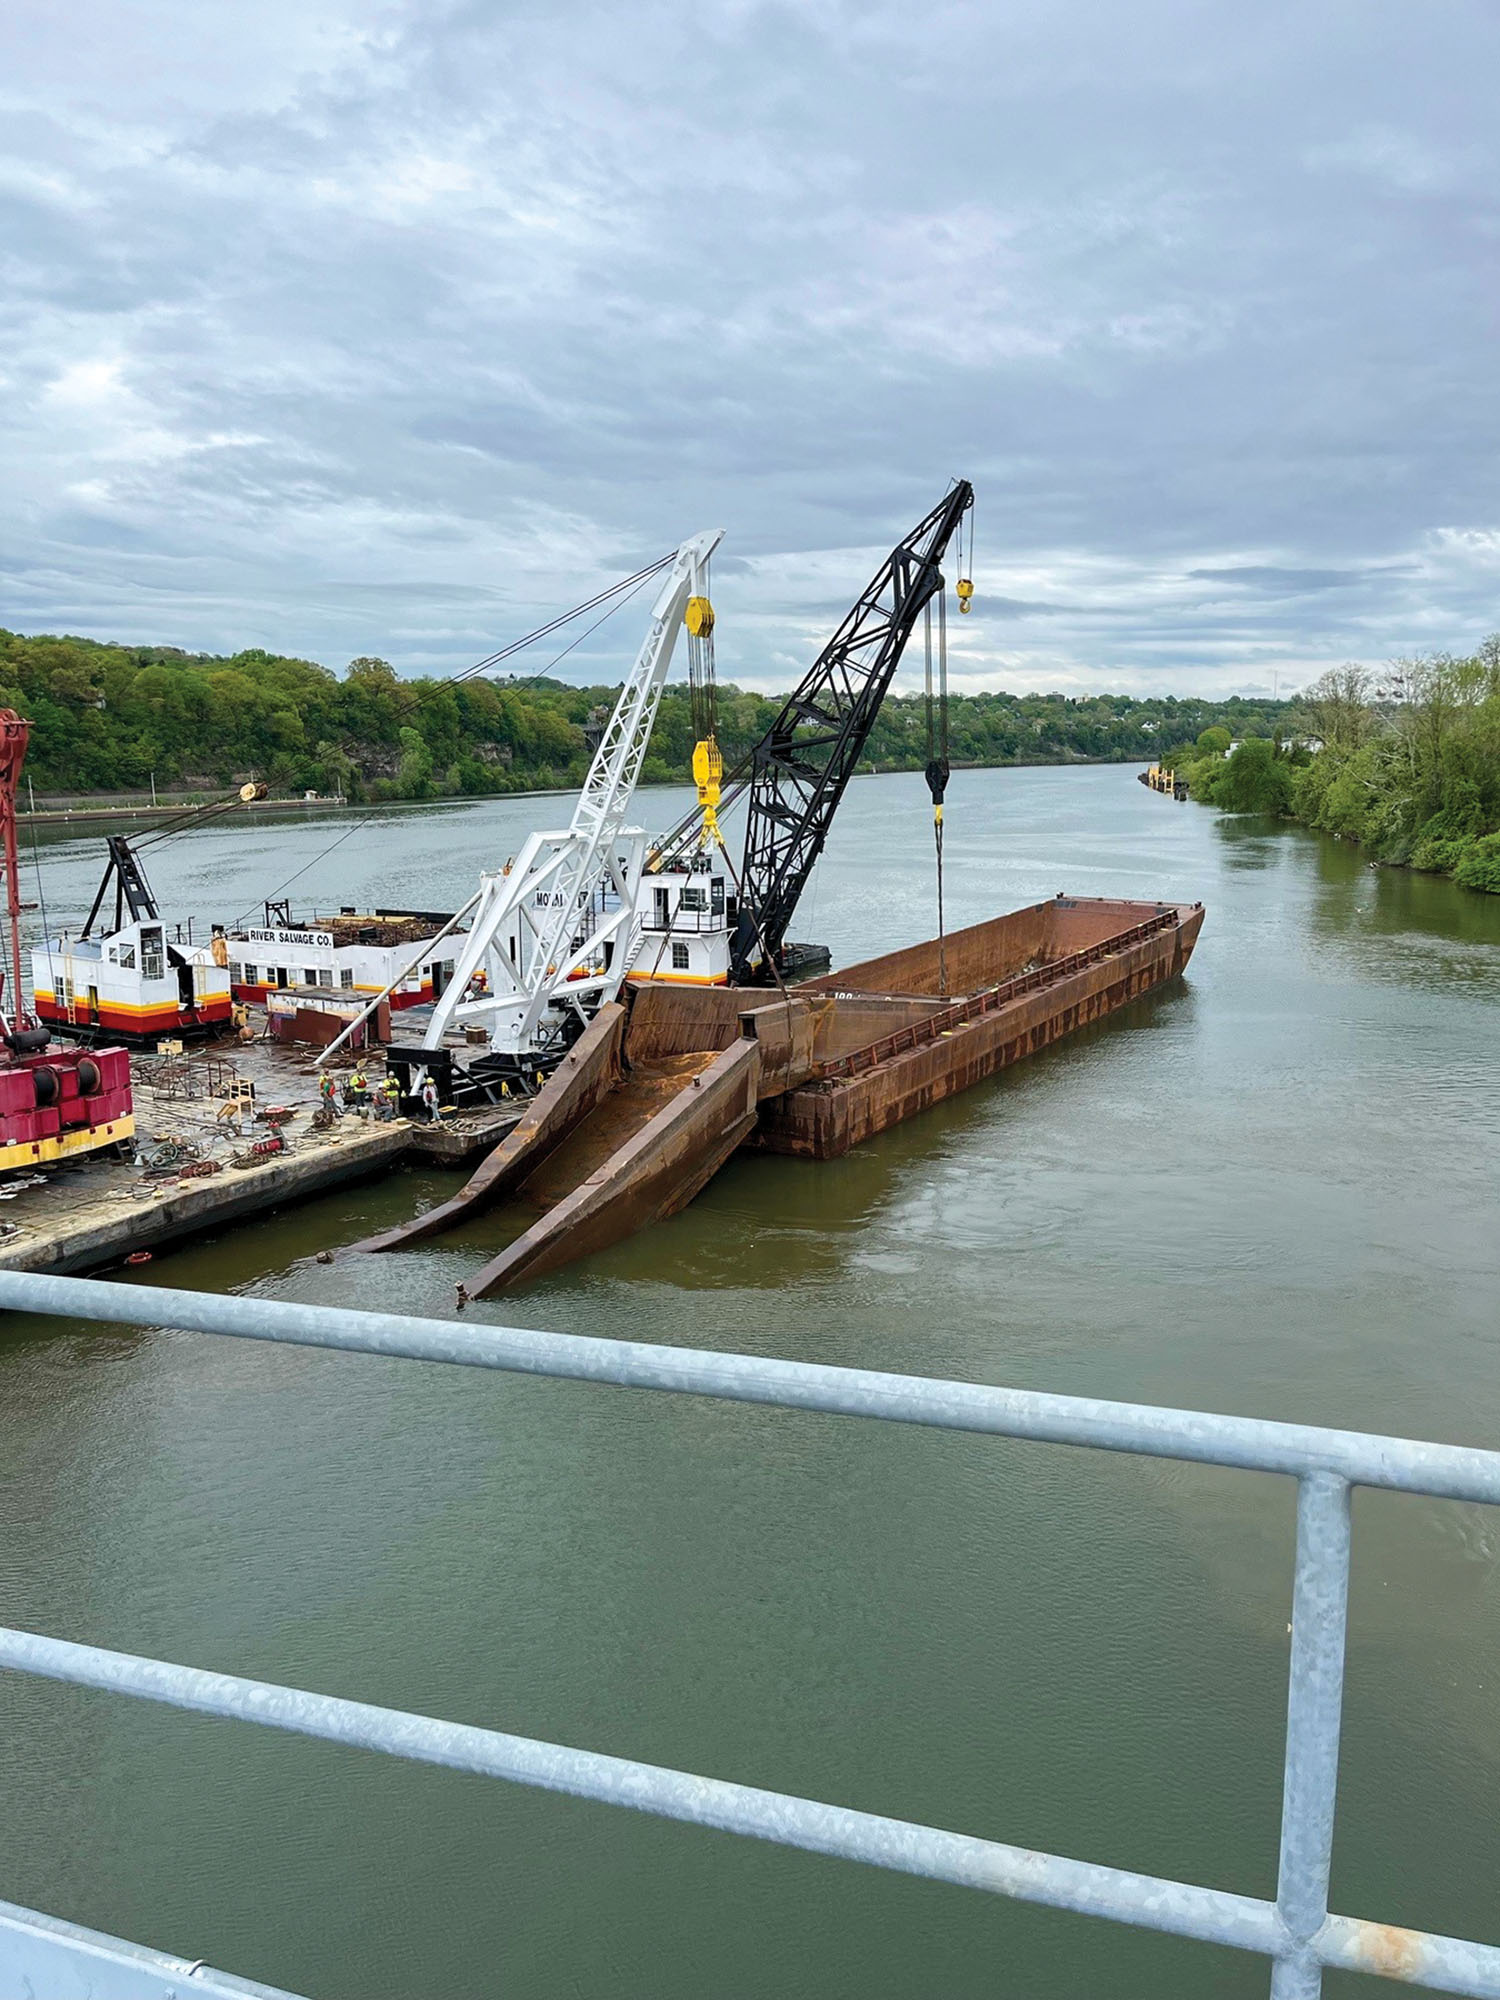 Crews removed two barges from where they were pinned against Emsworth Locks and Dam following a 26-barge breakaway in the Pittsburgh area on April 12. One barge remains lodged at Dashields Locks and Dam more than a month after the breakaway. (Photo courtesy of Pittsburgh Engineer District)